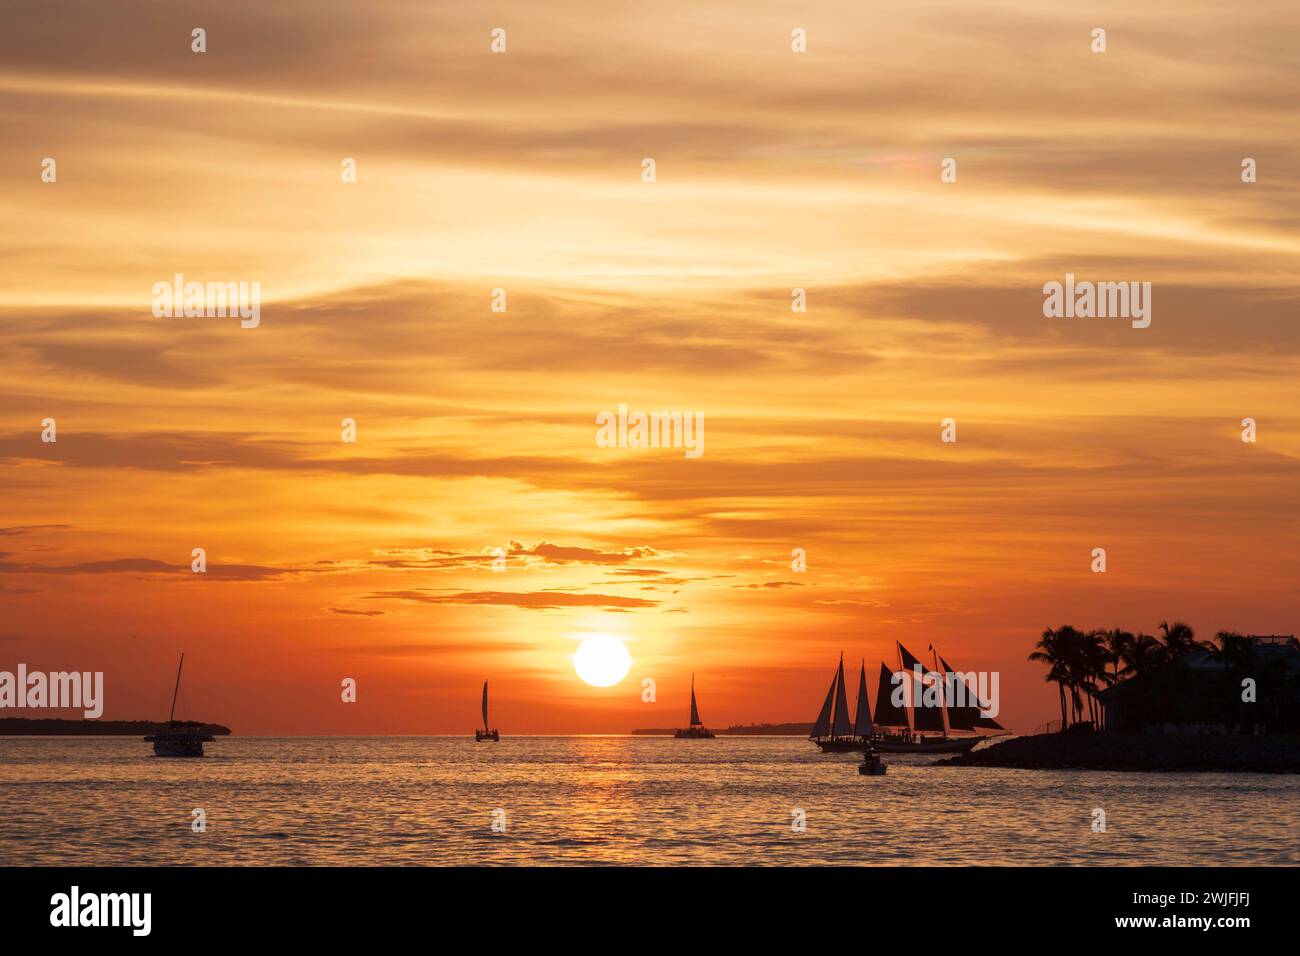 A spectacular sunset, off the coast of Key West, Florida, with sailing boats silhoutted against the orange sky Stock Photo